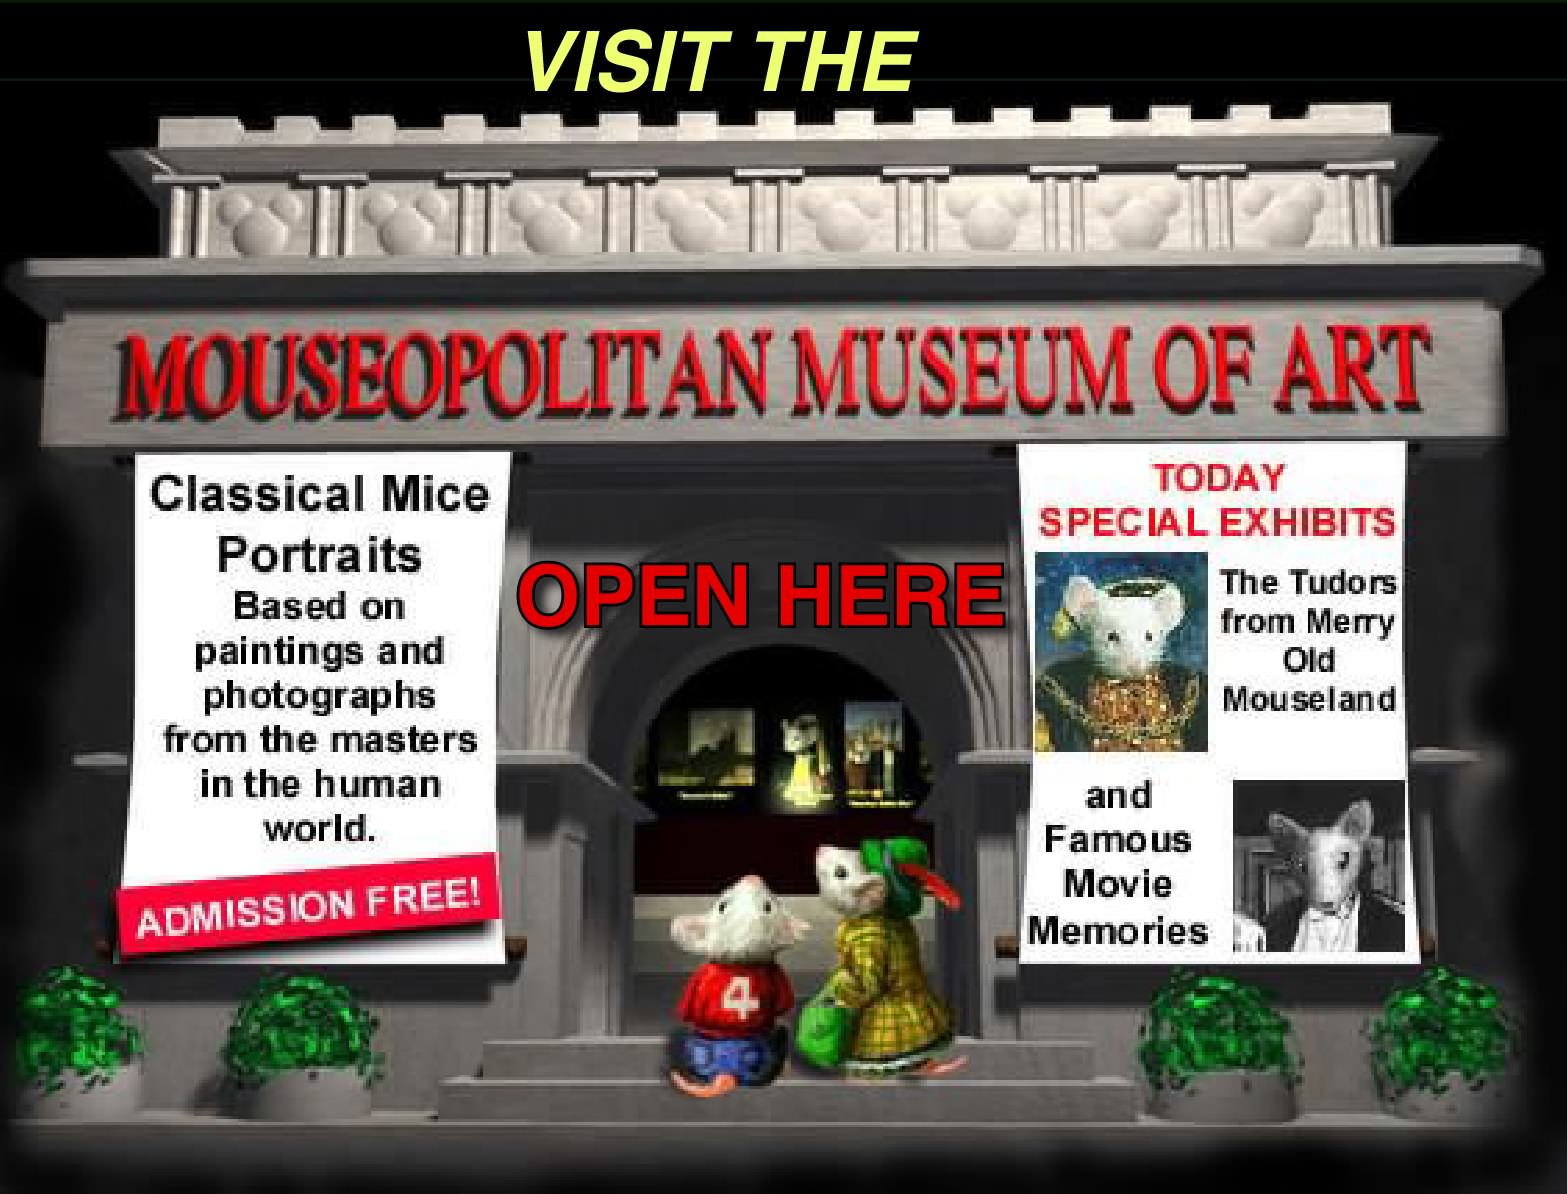 Mouseopolitan Museum of Art by Alan F. Beck